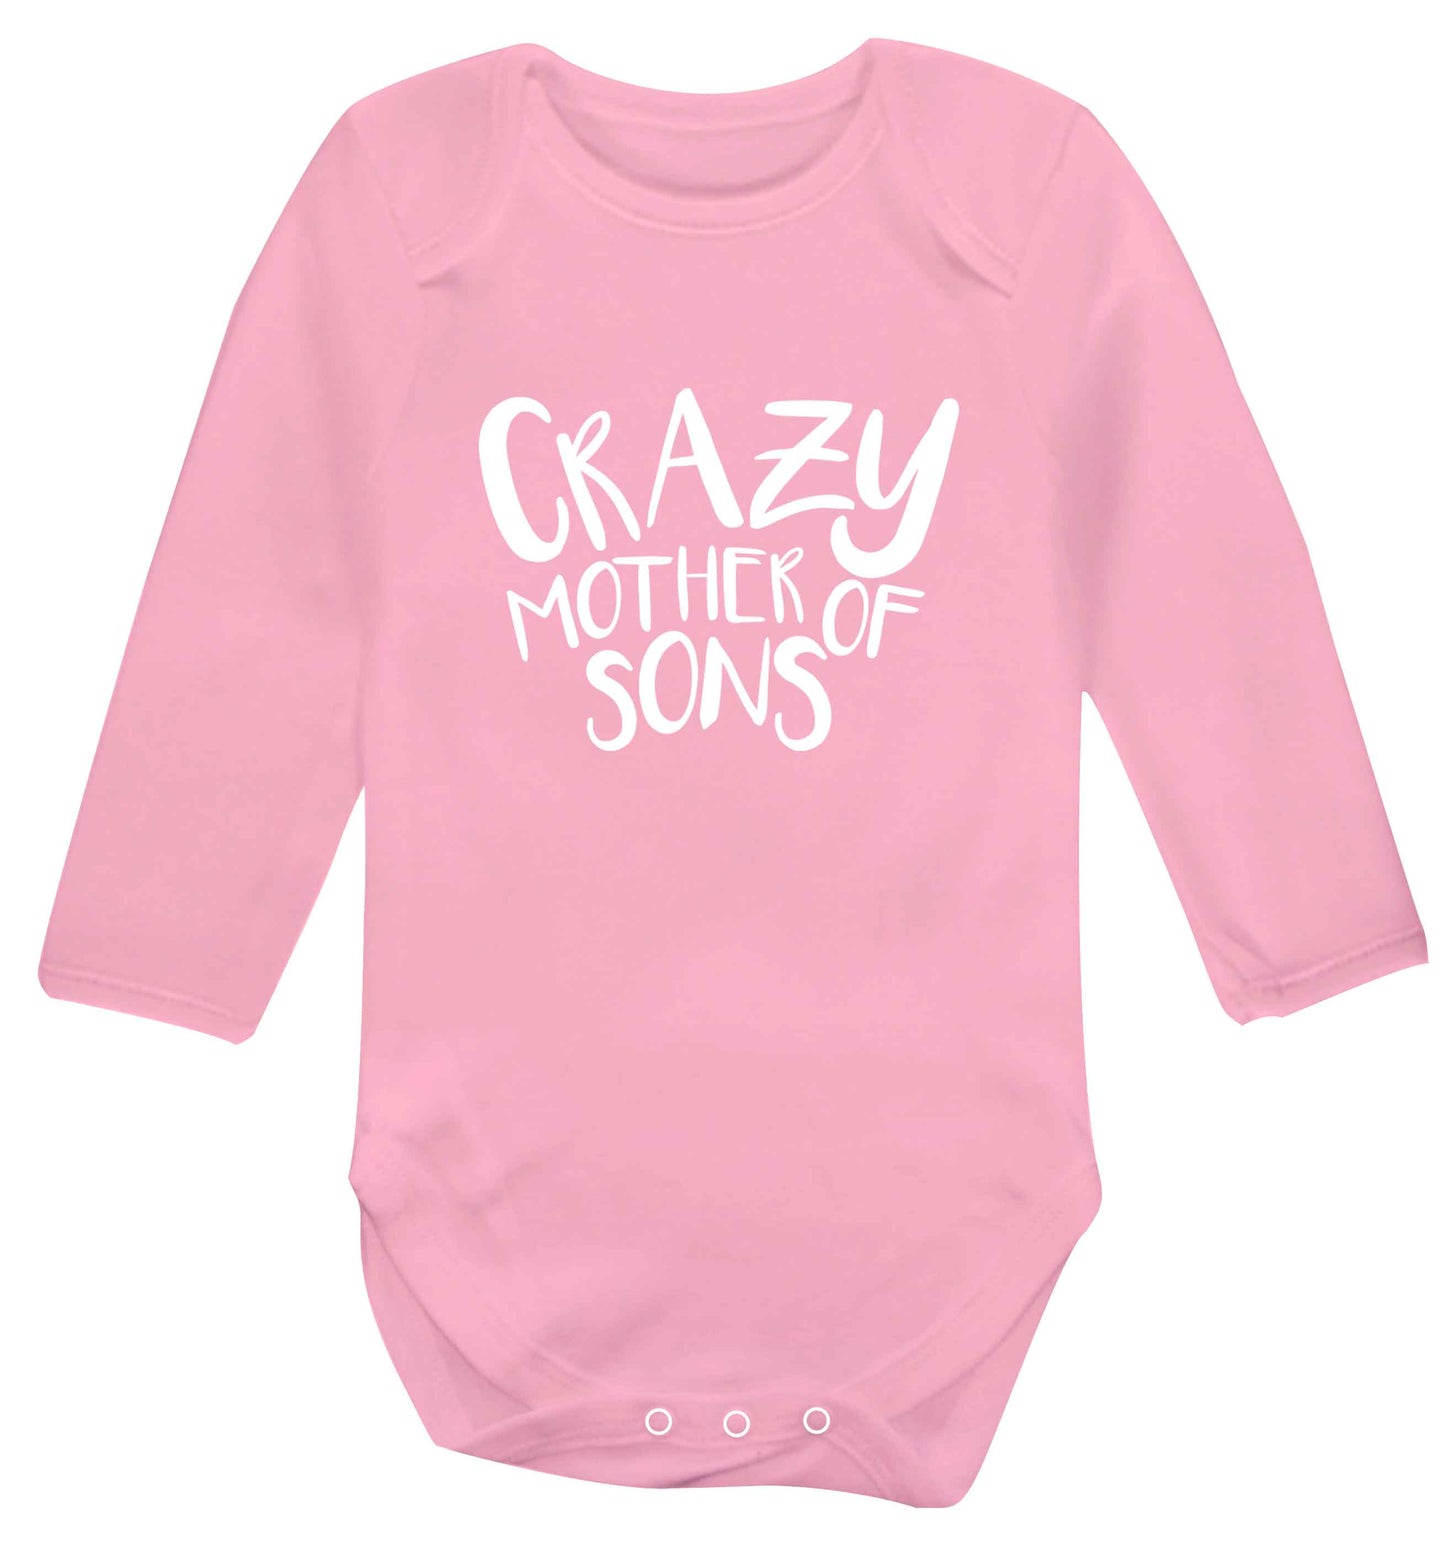 Crazy mother of sons baby vest long sleeved pale pink 6-12 months